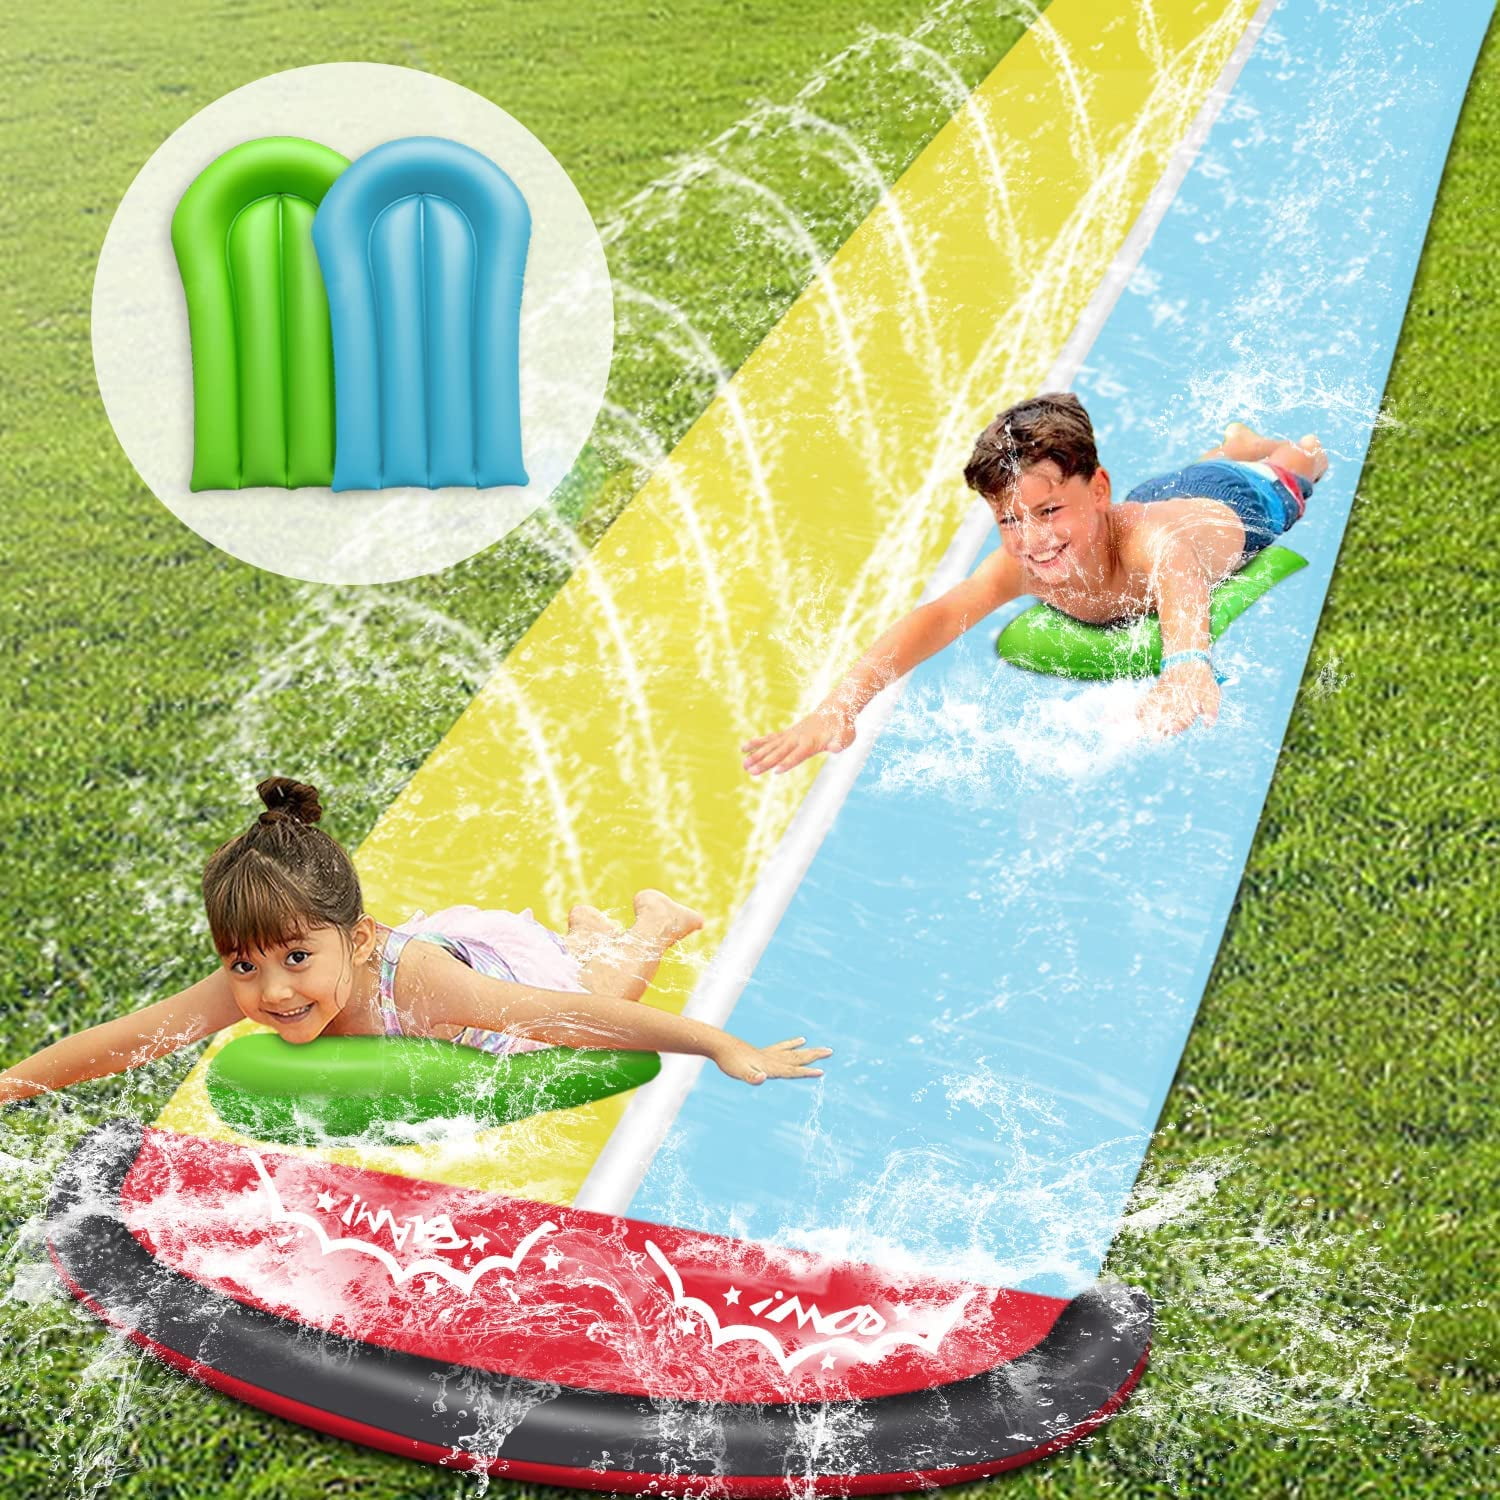 Terra Lawn Water Slide for Adults and Children - 20FT Long Big Adult ...